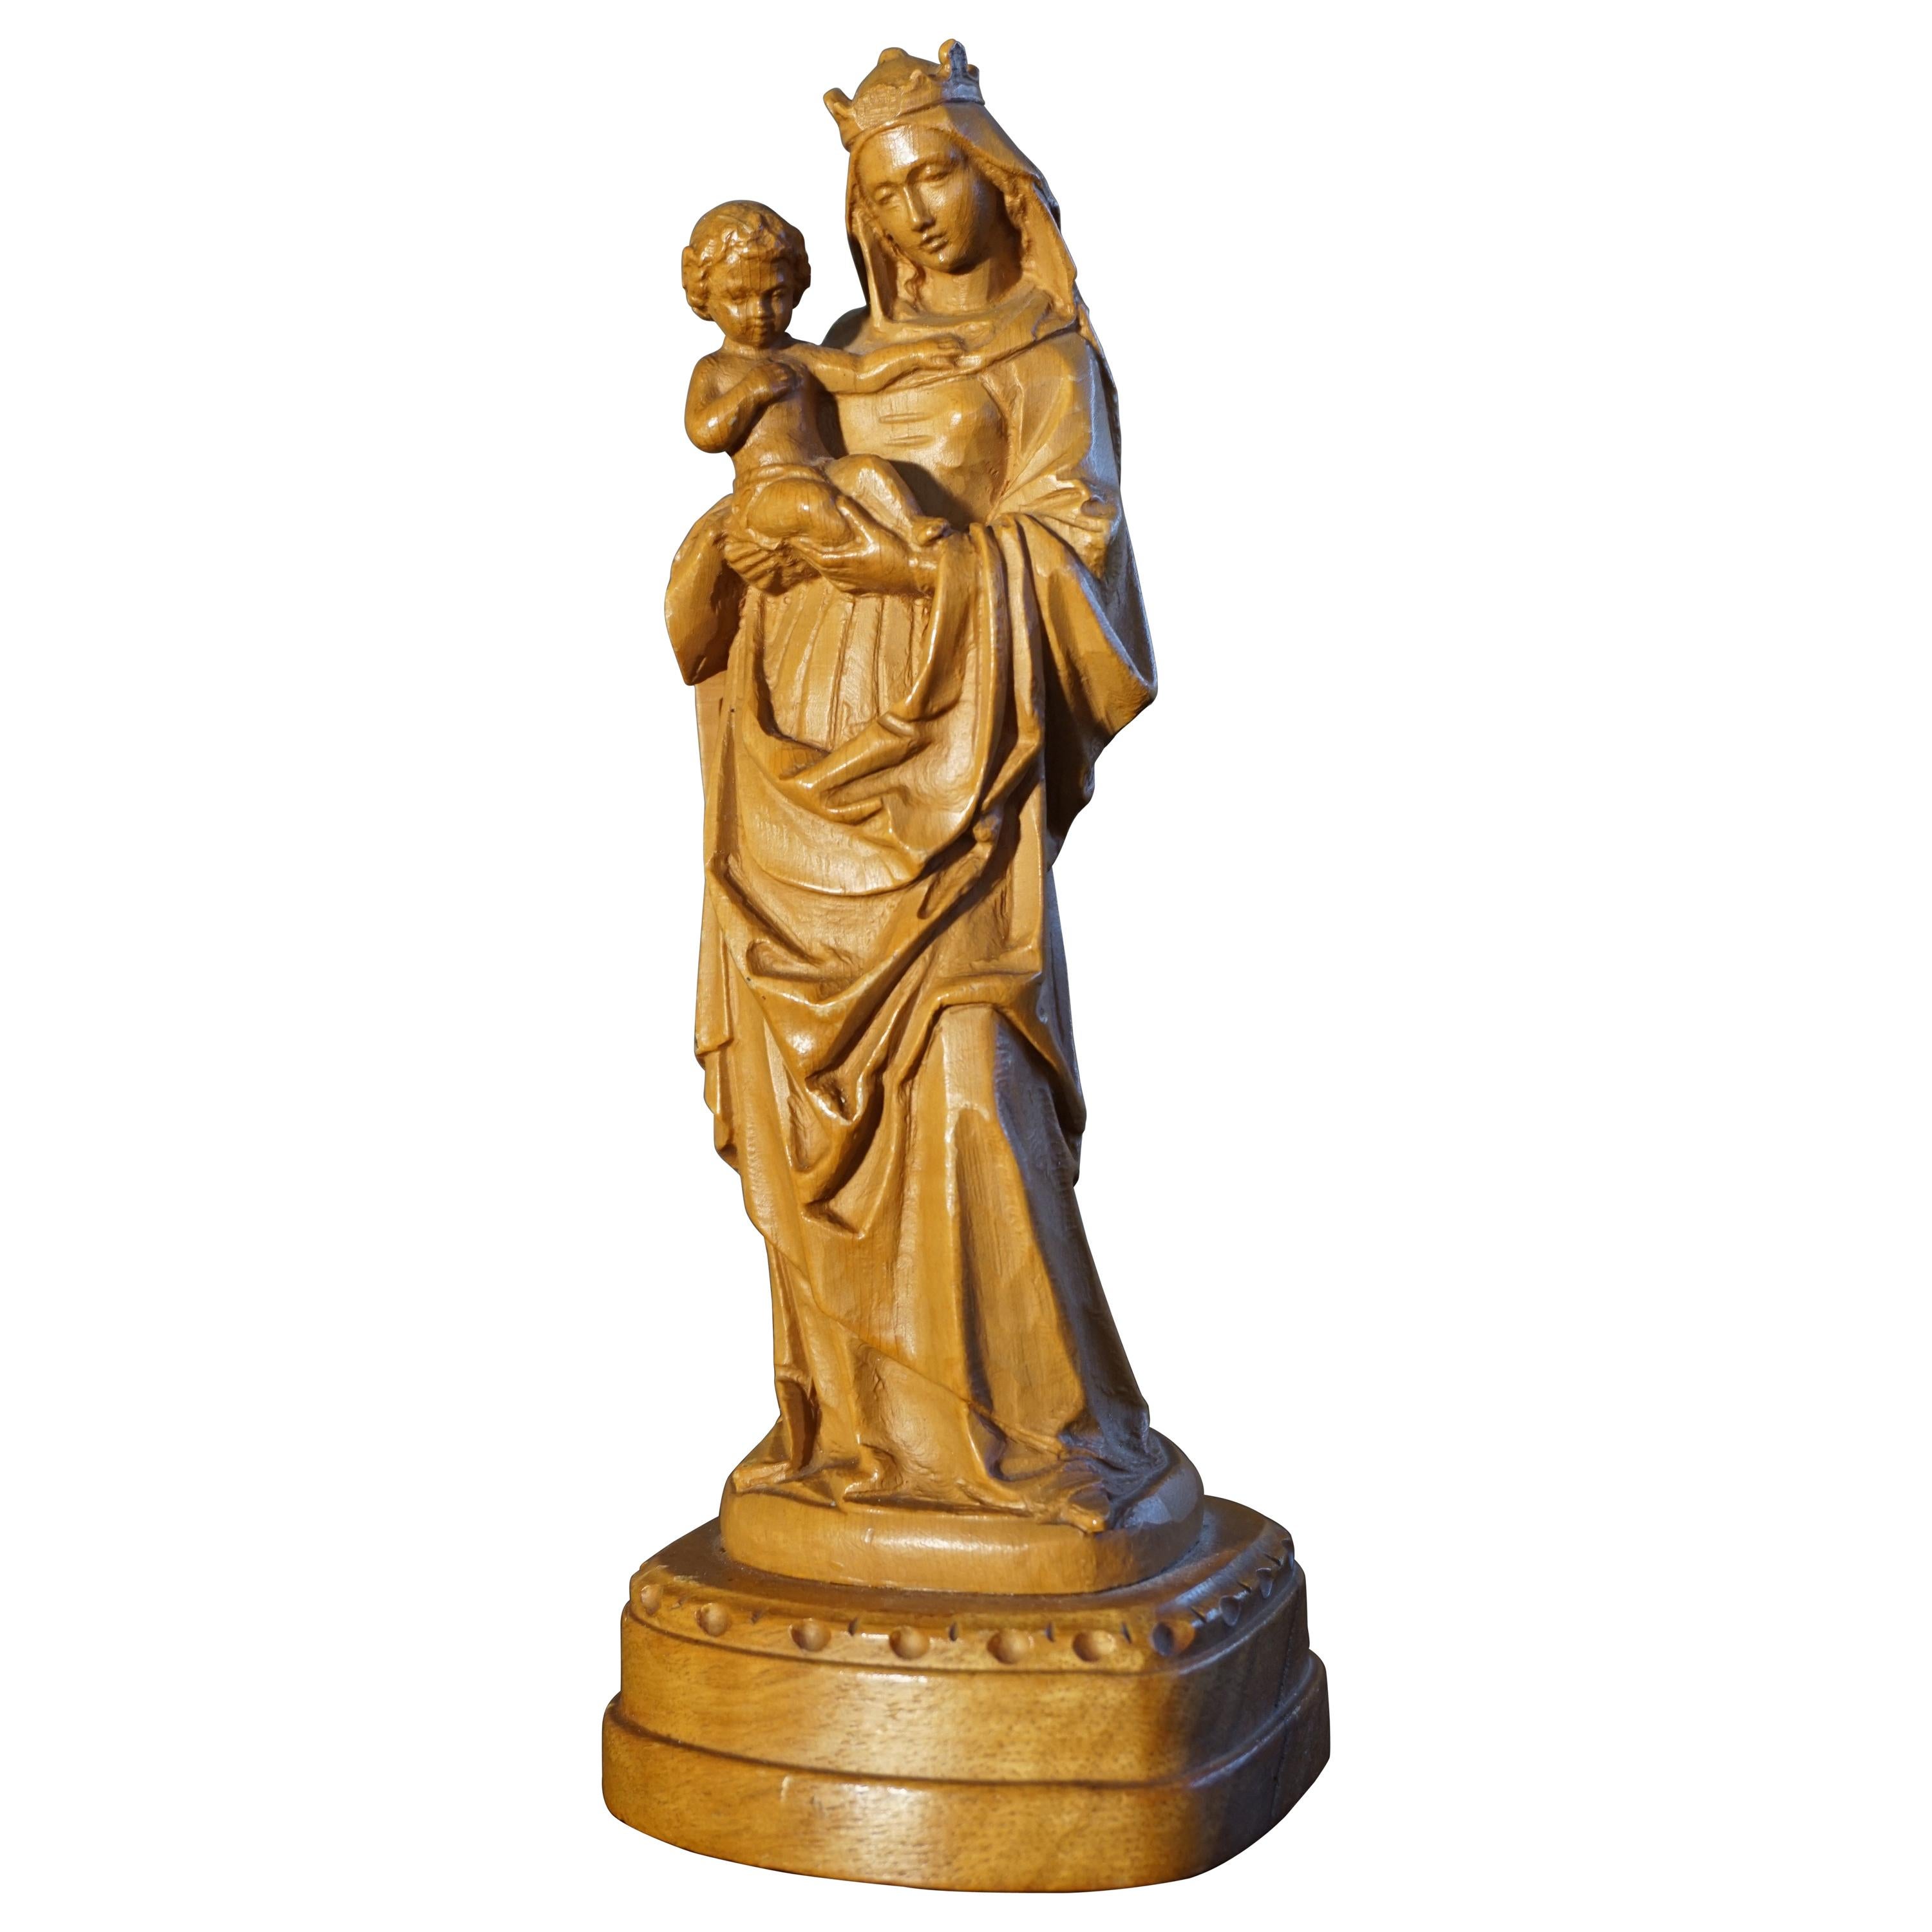 Finest Quality, Hand Carved Miniature Statue of Mother Mary Holding Child Jesus